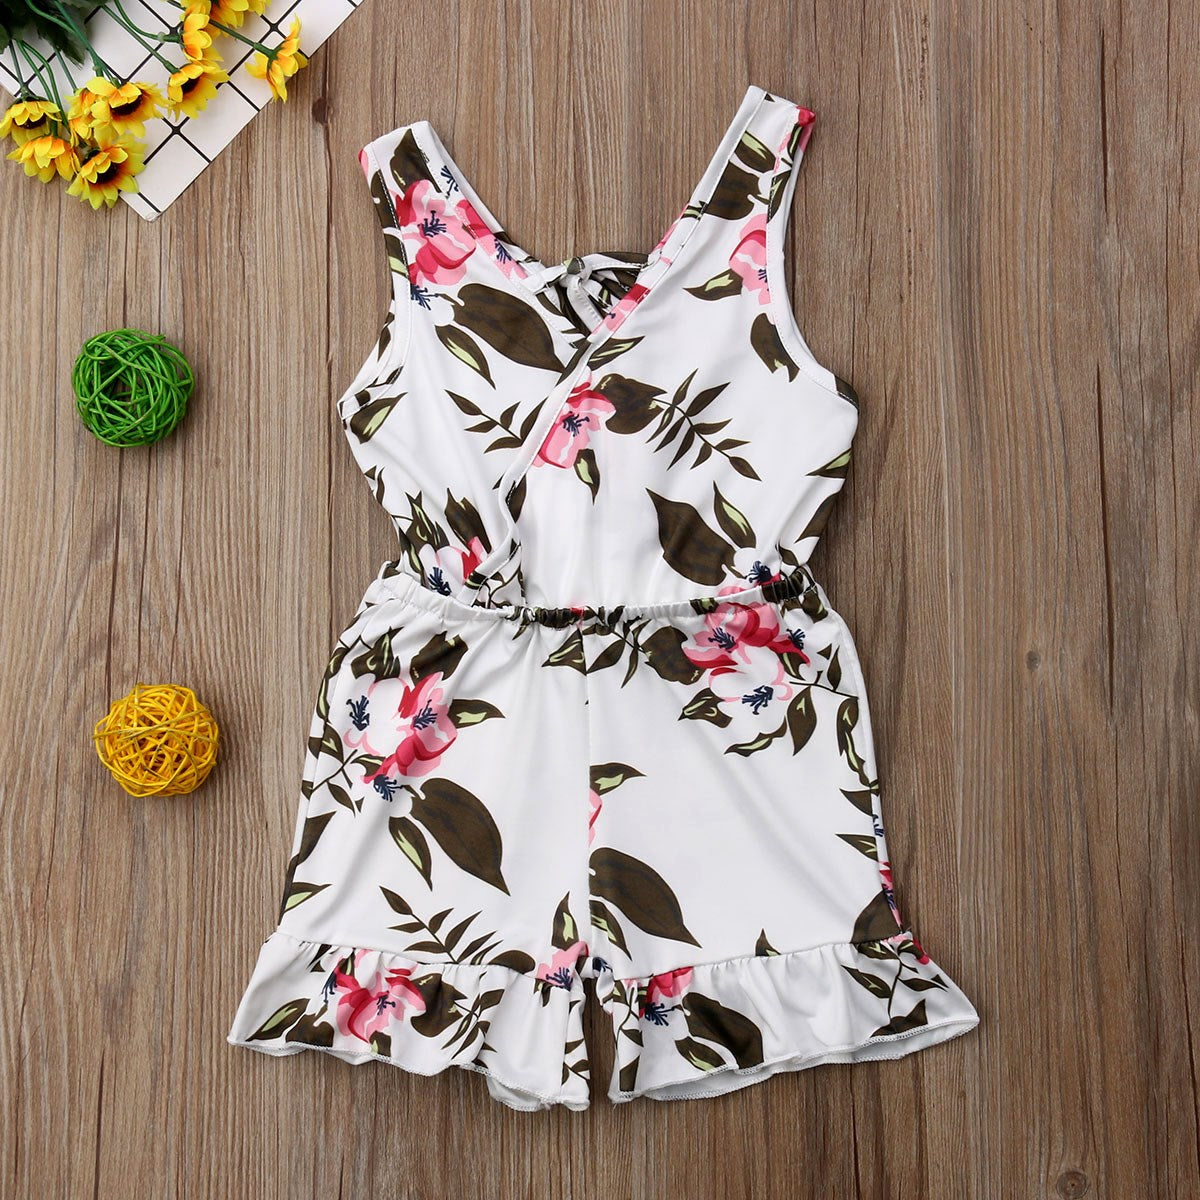 Summer Girls baby girl Floral Outfits Clothes